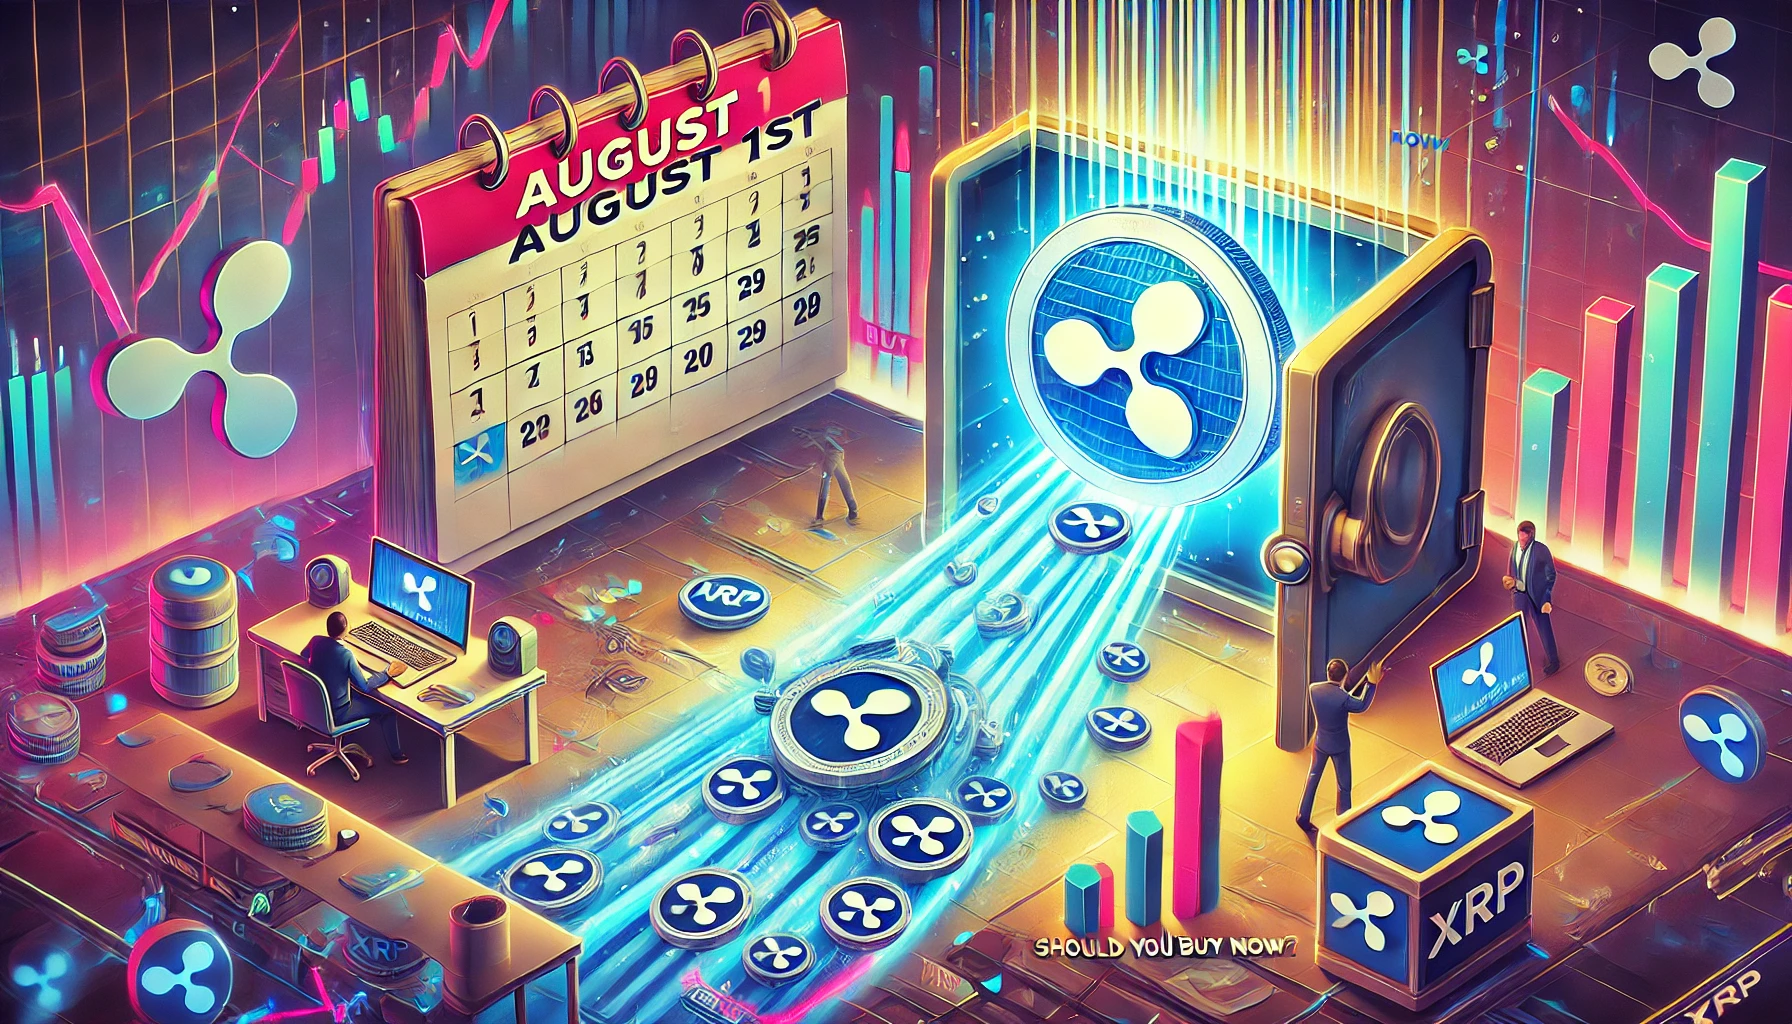 Ripple to Unlock 1 Billion XRP Tokens Worth $609M on August 1 – Should You Buy Now?